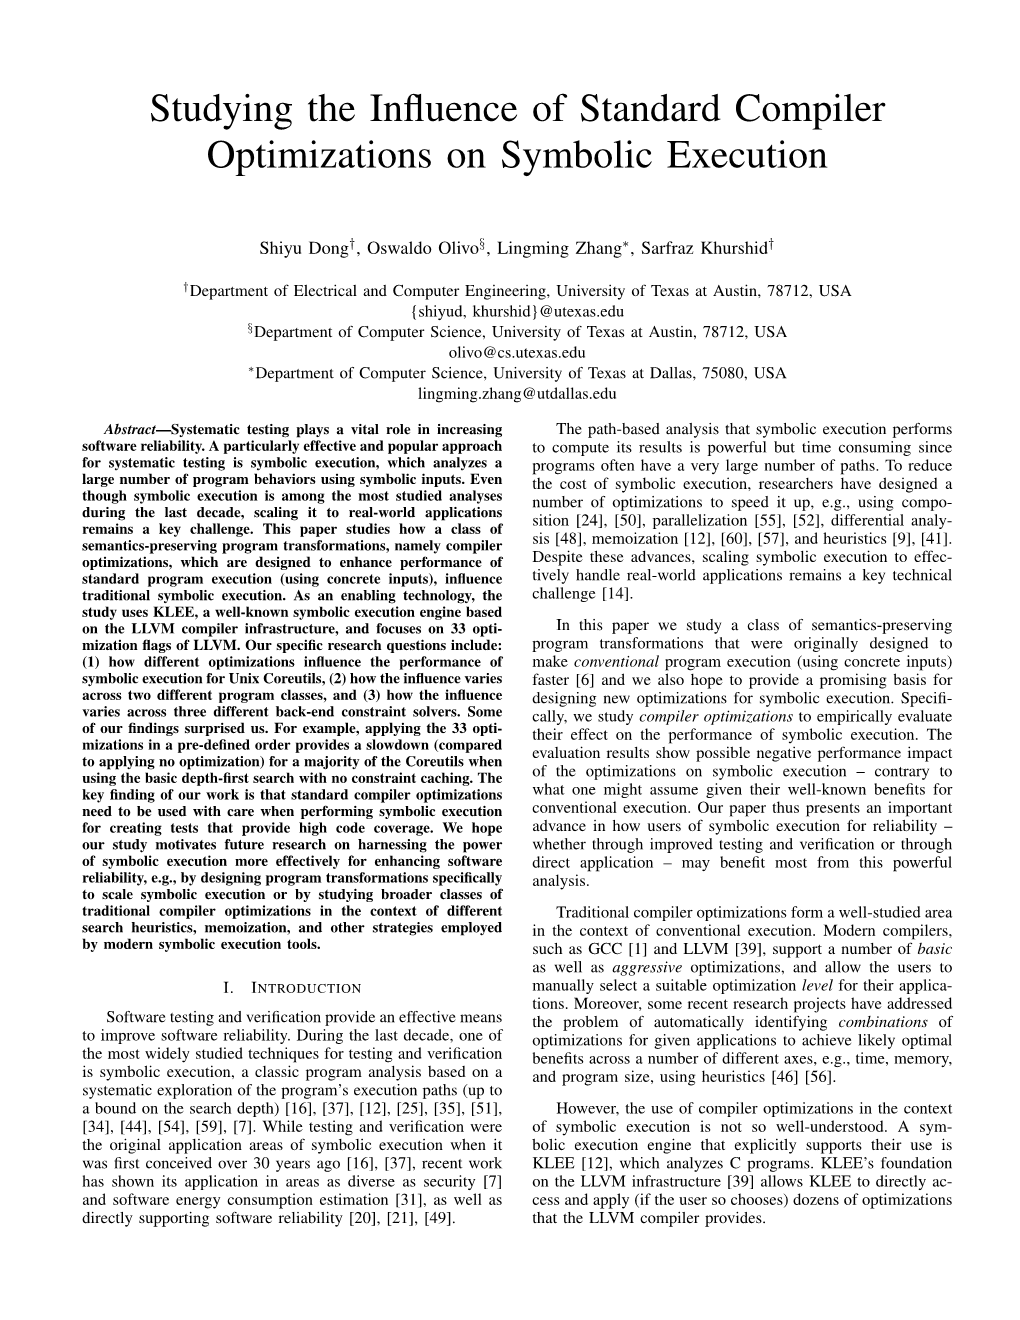 Studying the Influence of Standard Compiler Optimizations On